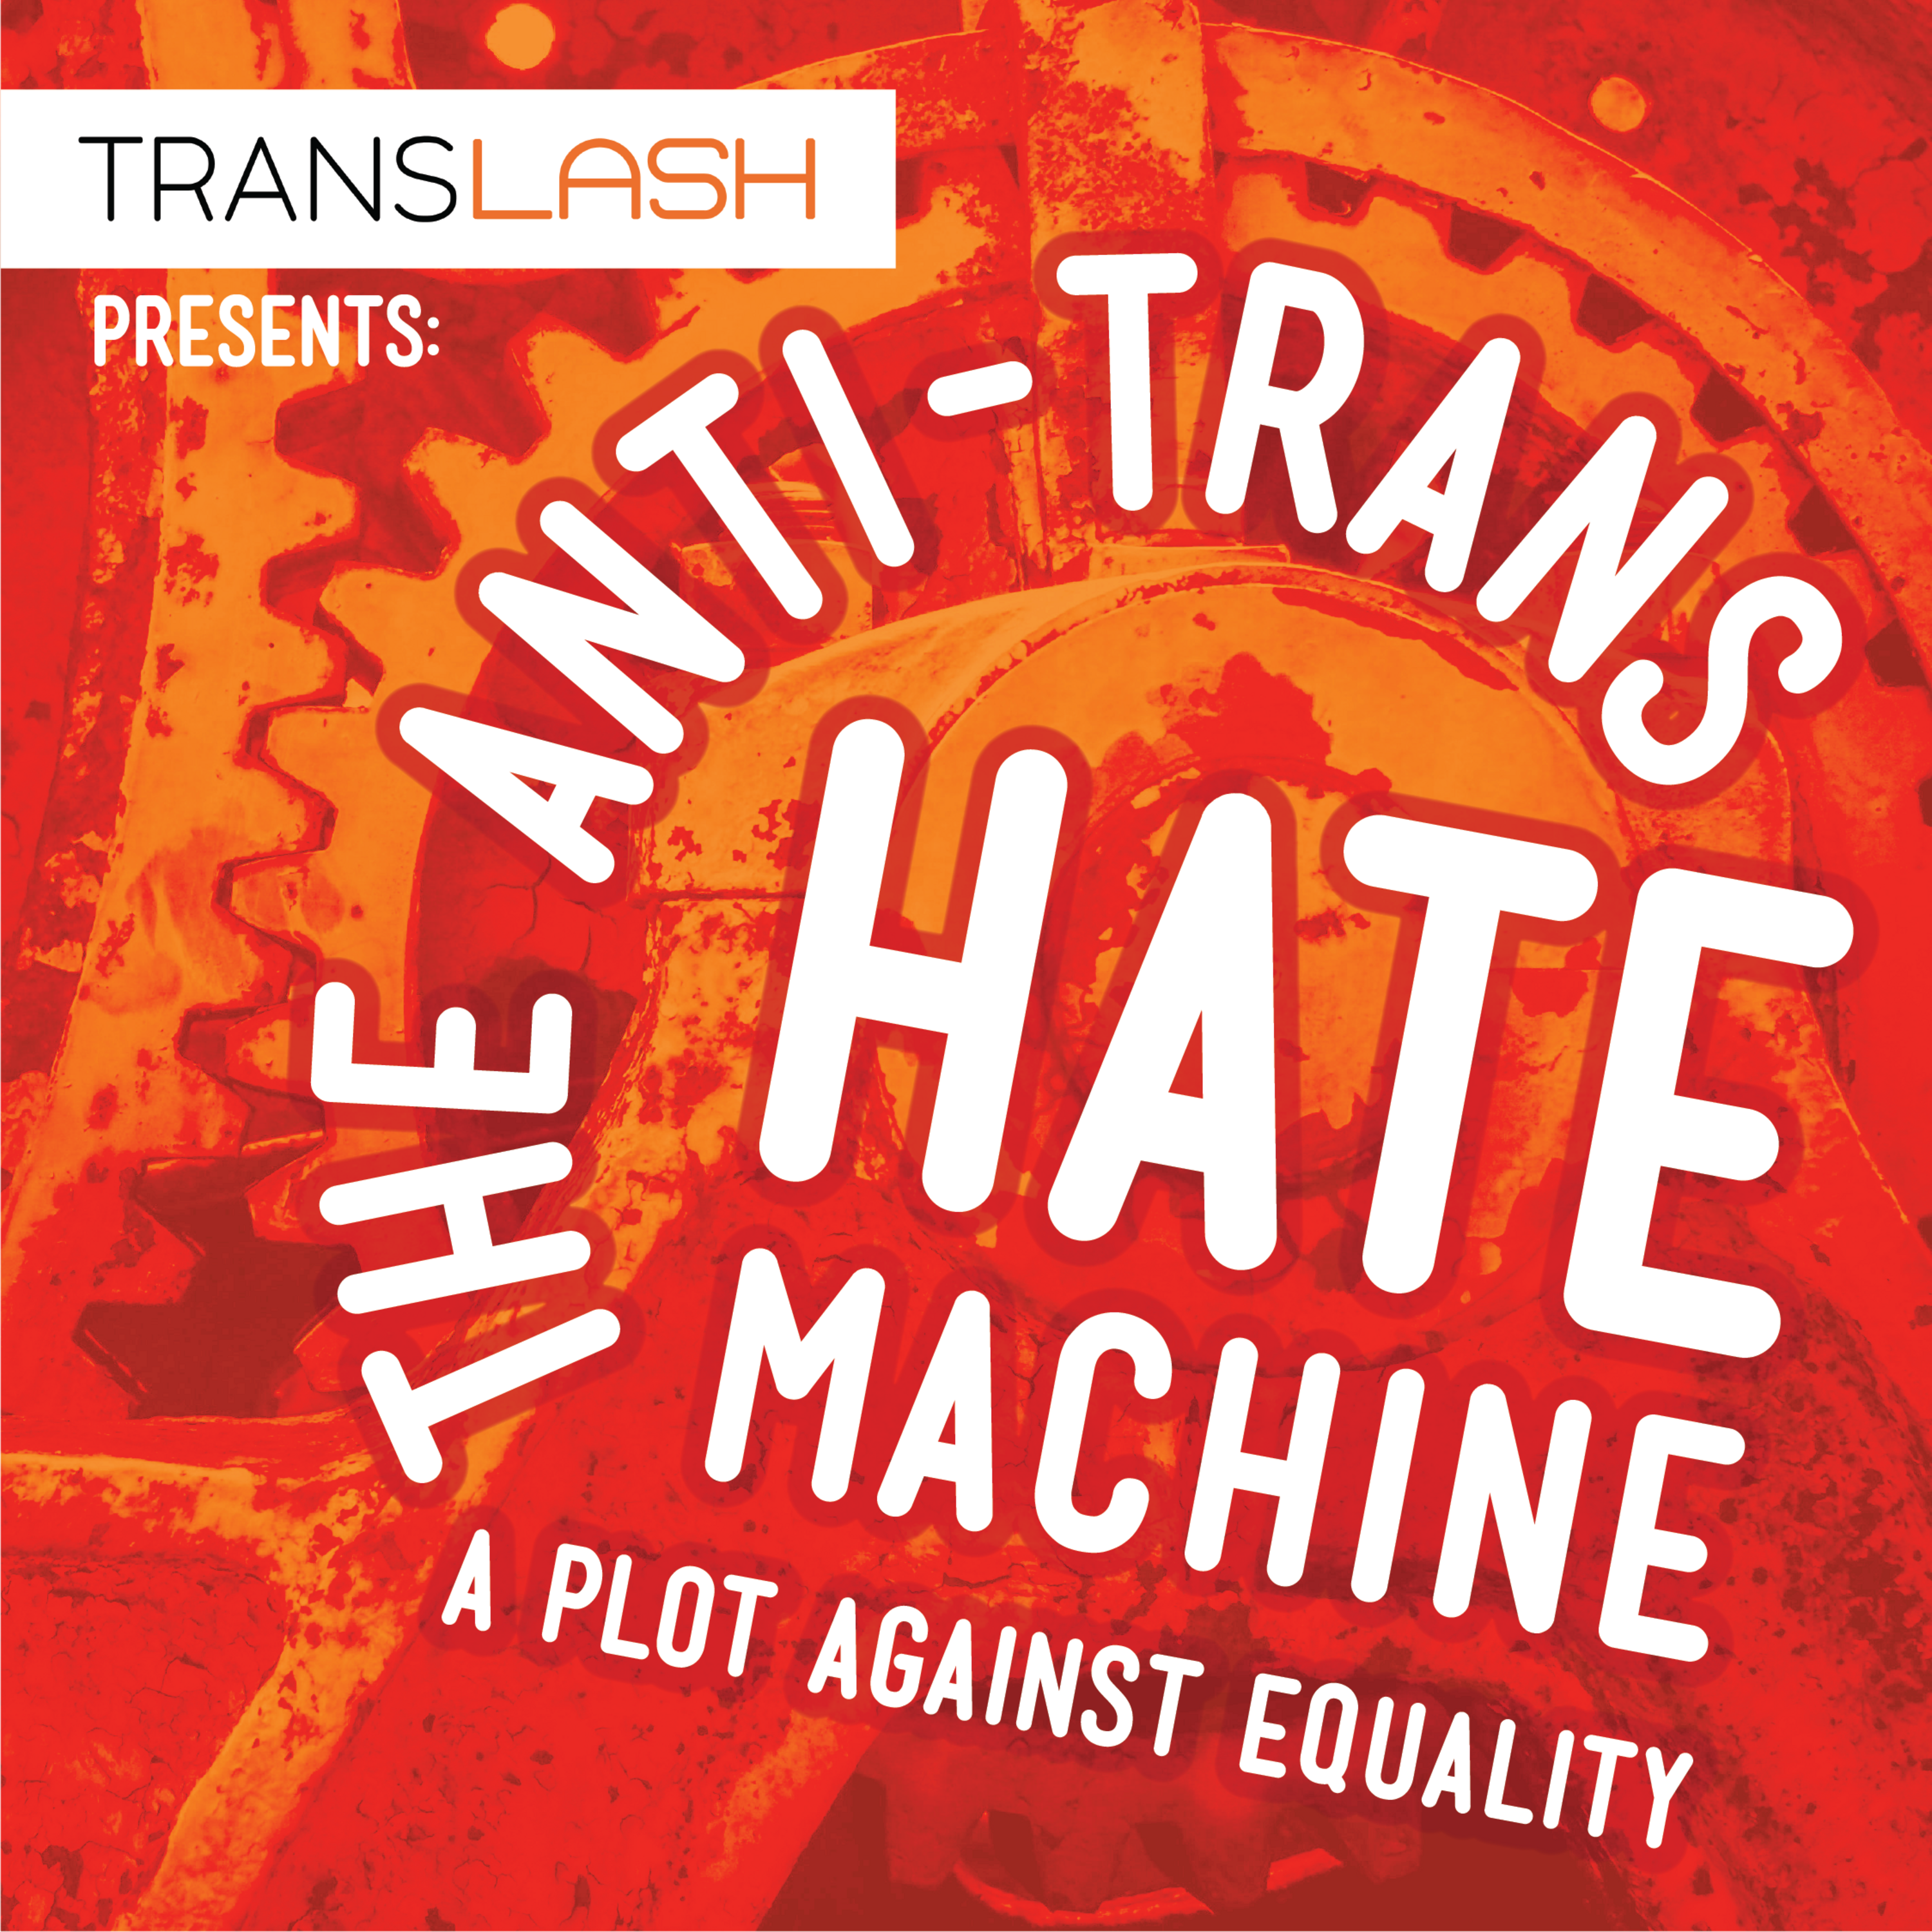 The Anti-Trans Hate Machine: A Plot Against Equality - Trailer